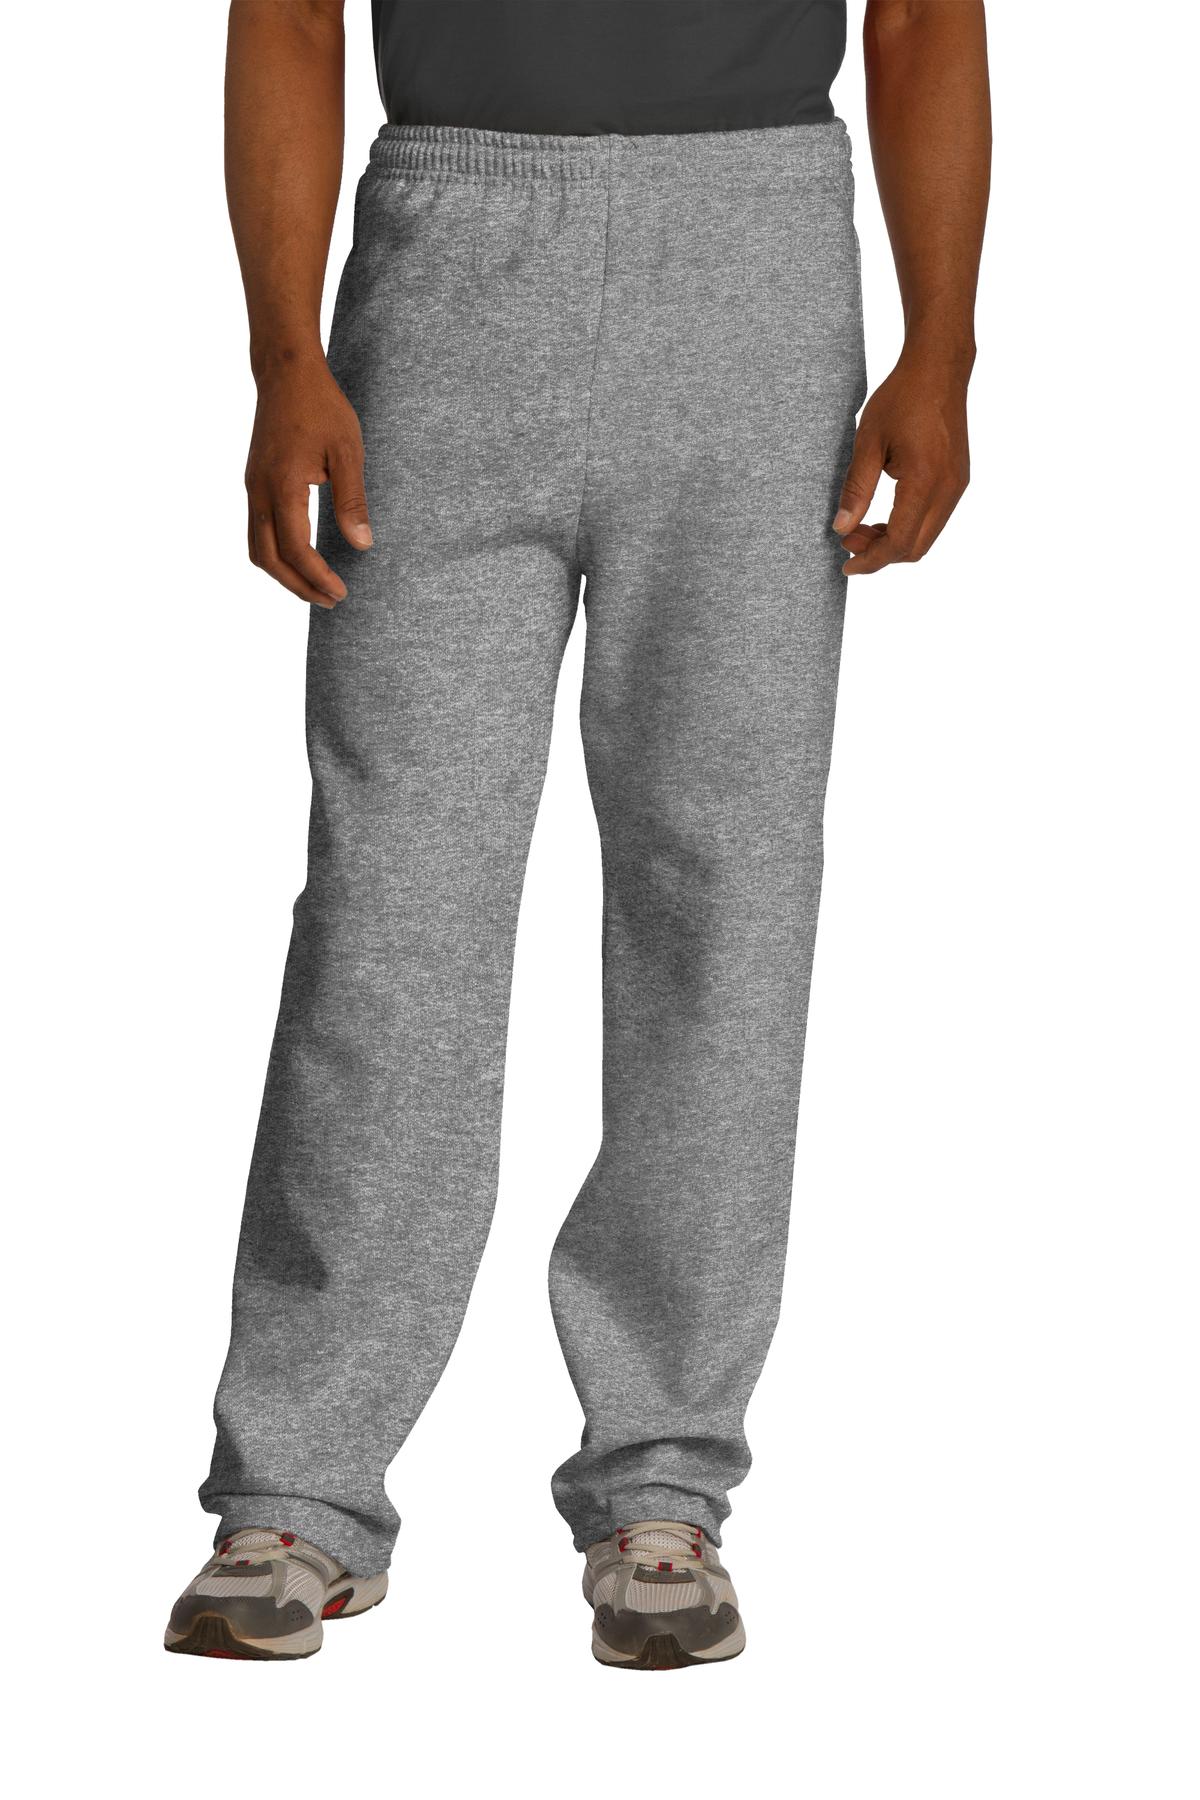 JERZEES® NuBlend® Open Bottom Pant with Pockets. 974MP - DFW Impression